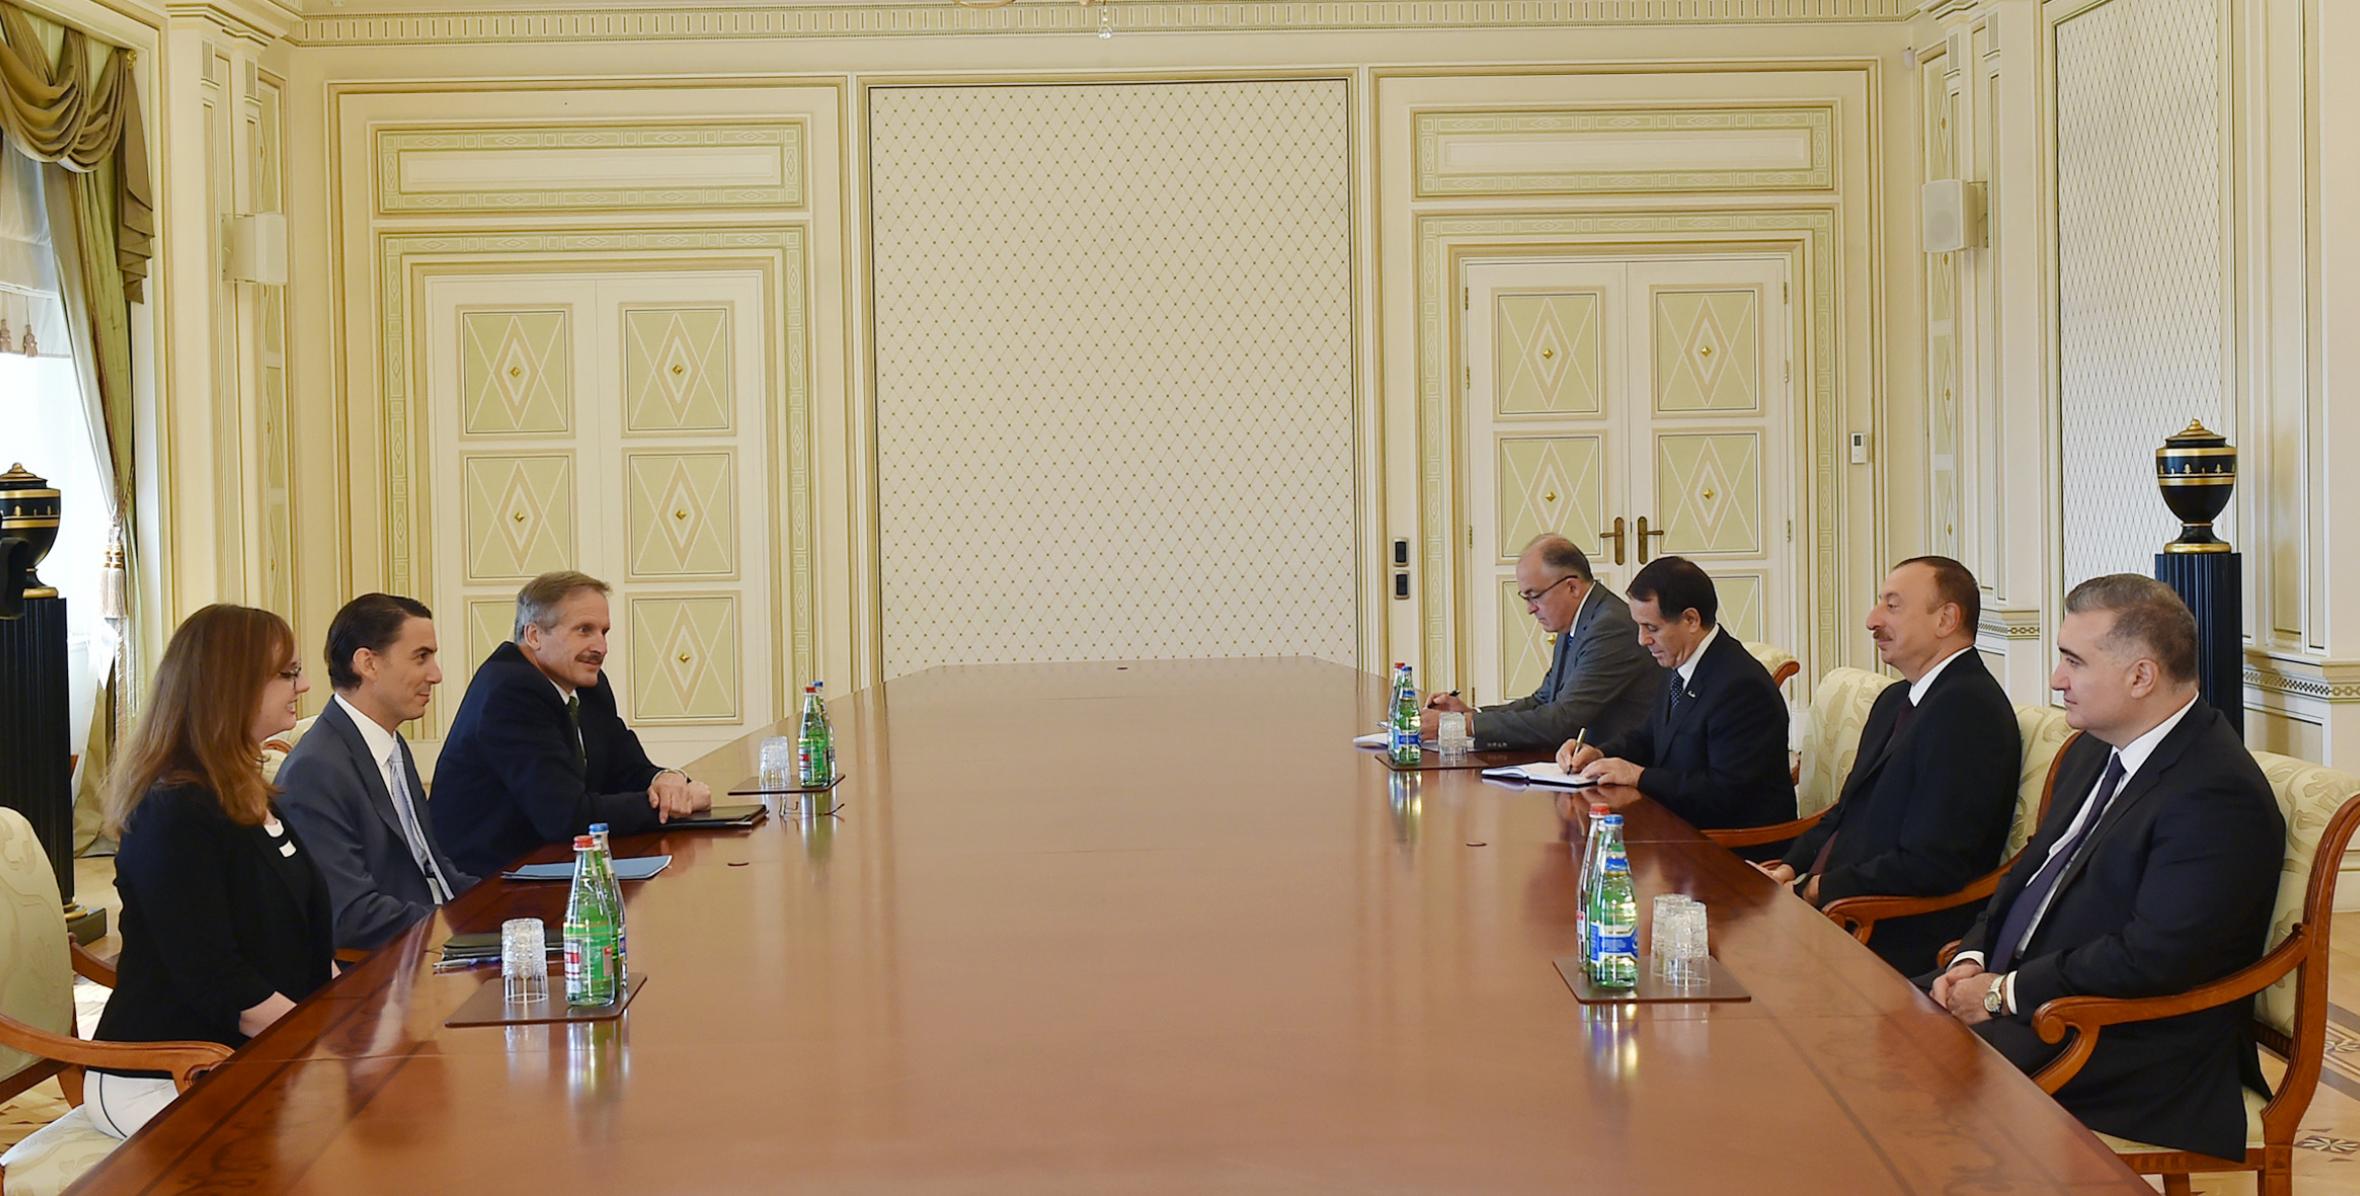 Ilham Aliyev received a delegation led by the Special Envoy and Coordinator for International Energy Affairs at the US Department of State